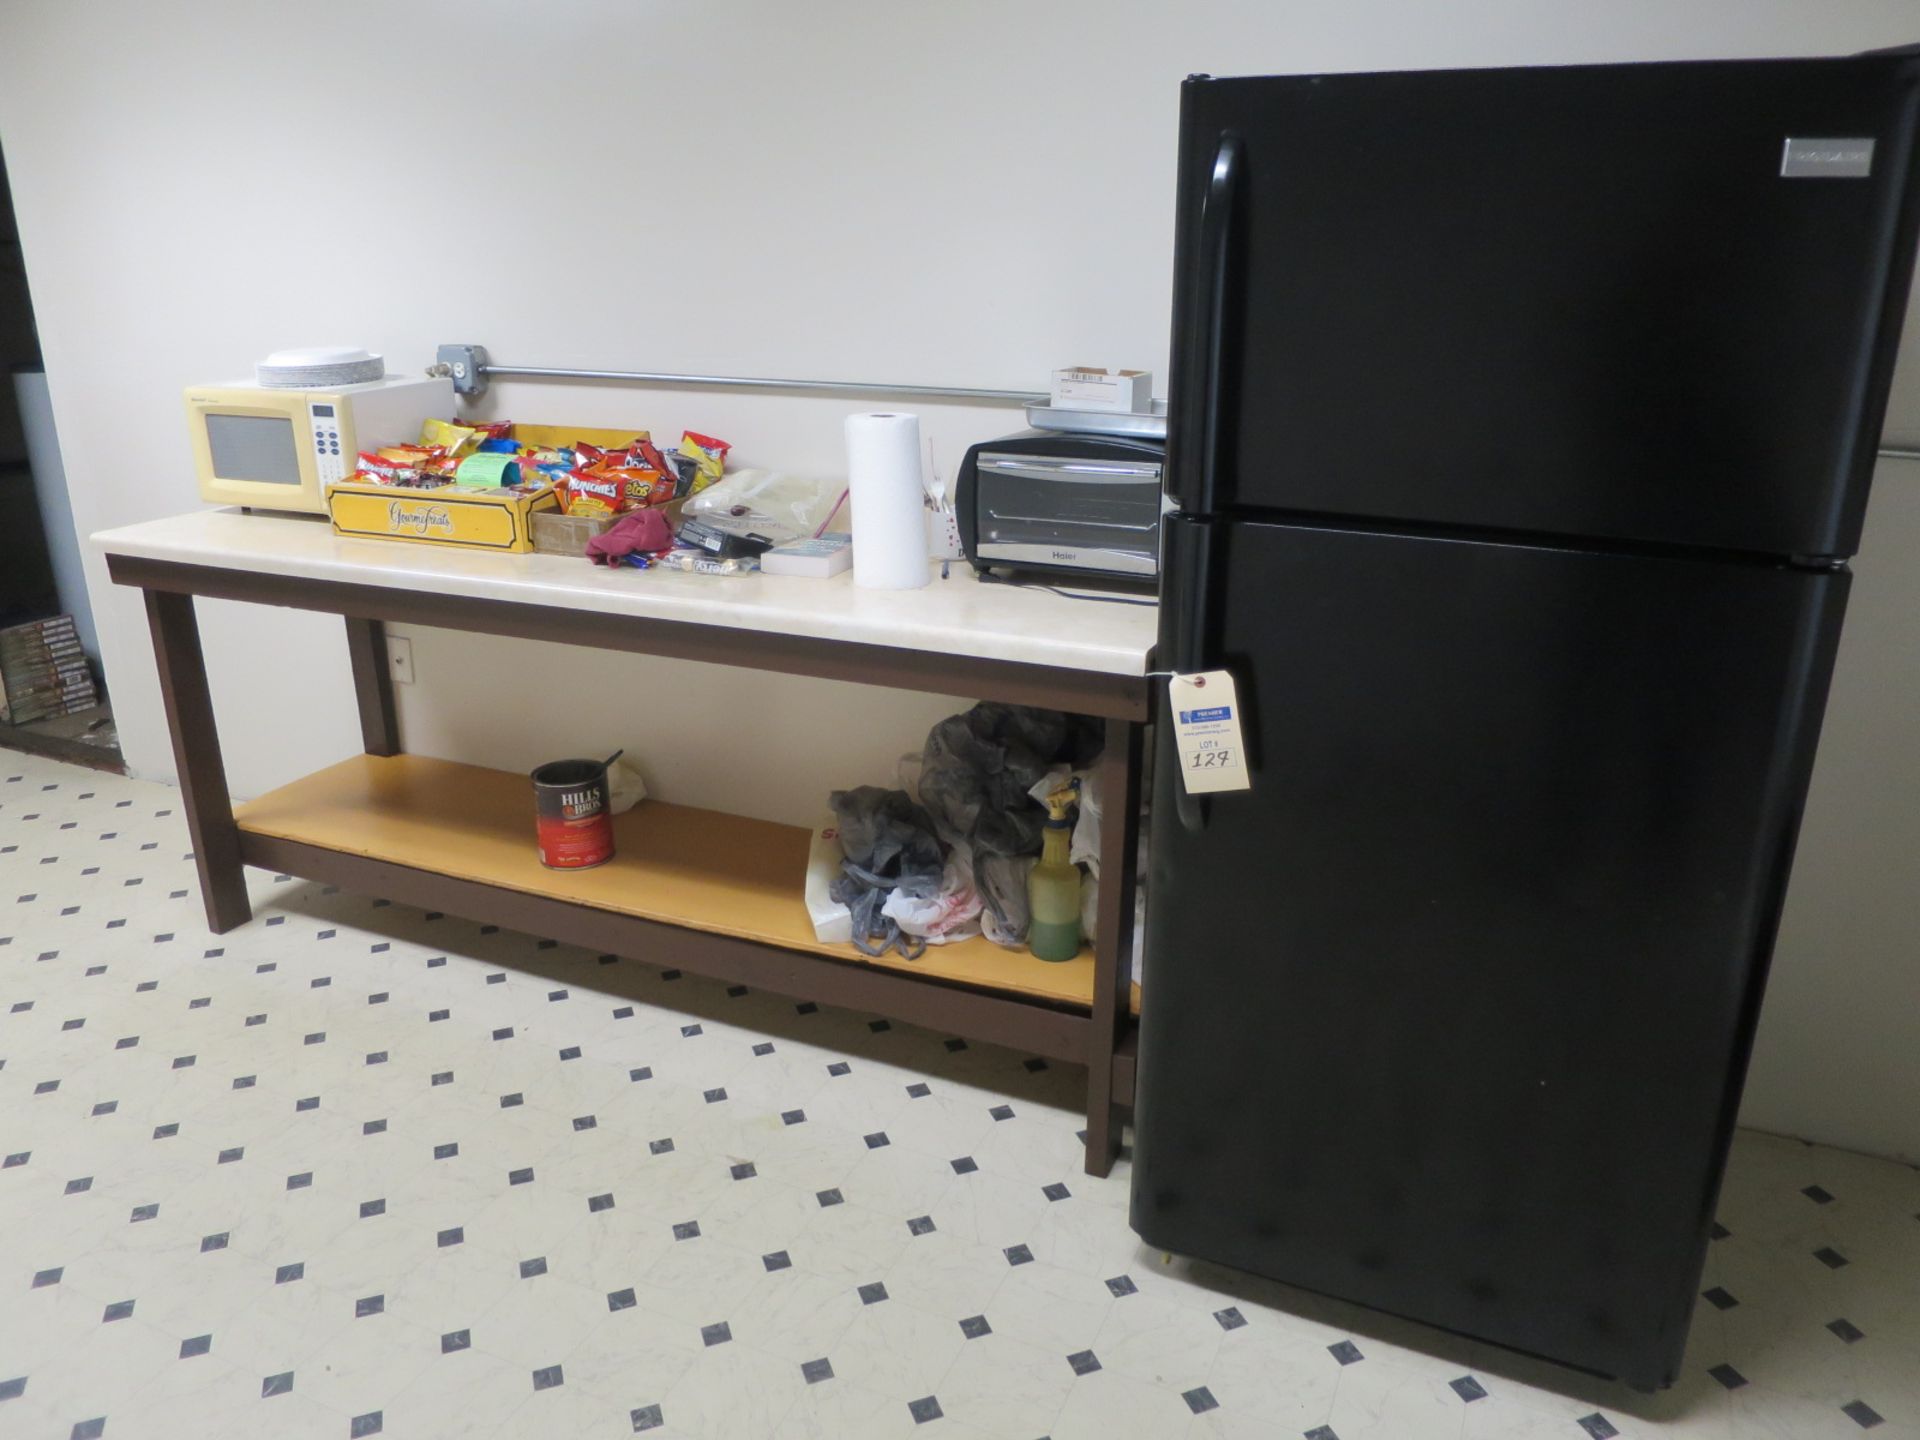 Break Room Items including Refrigerator, Microwave, Toaster and Table